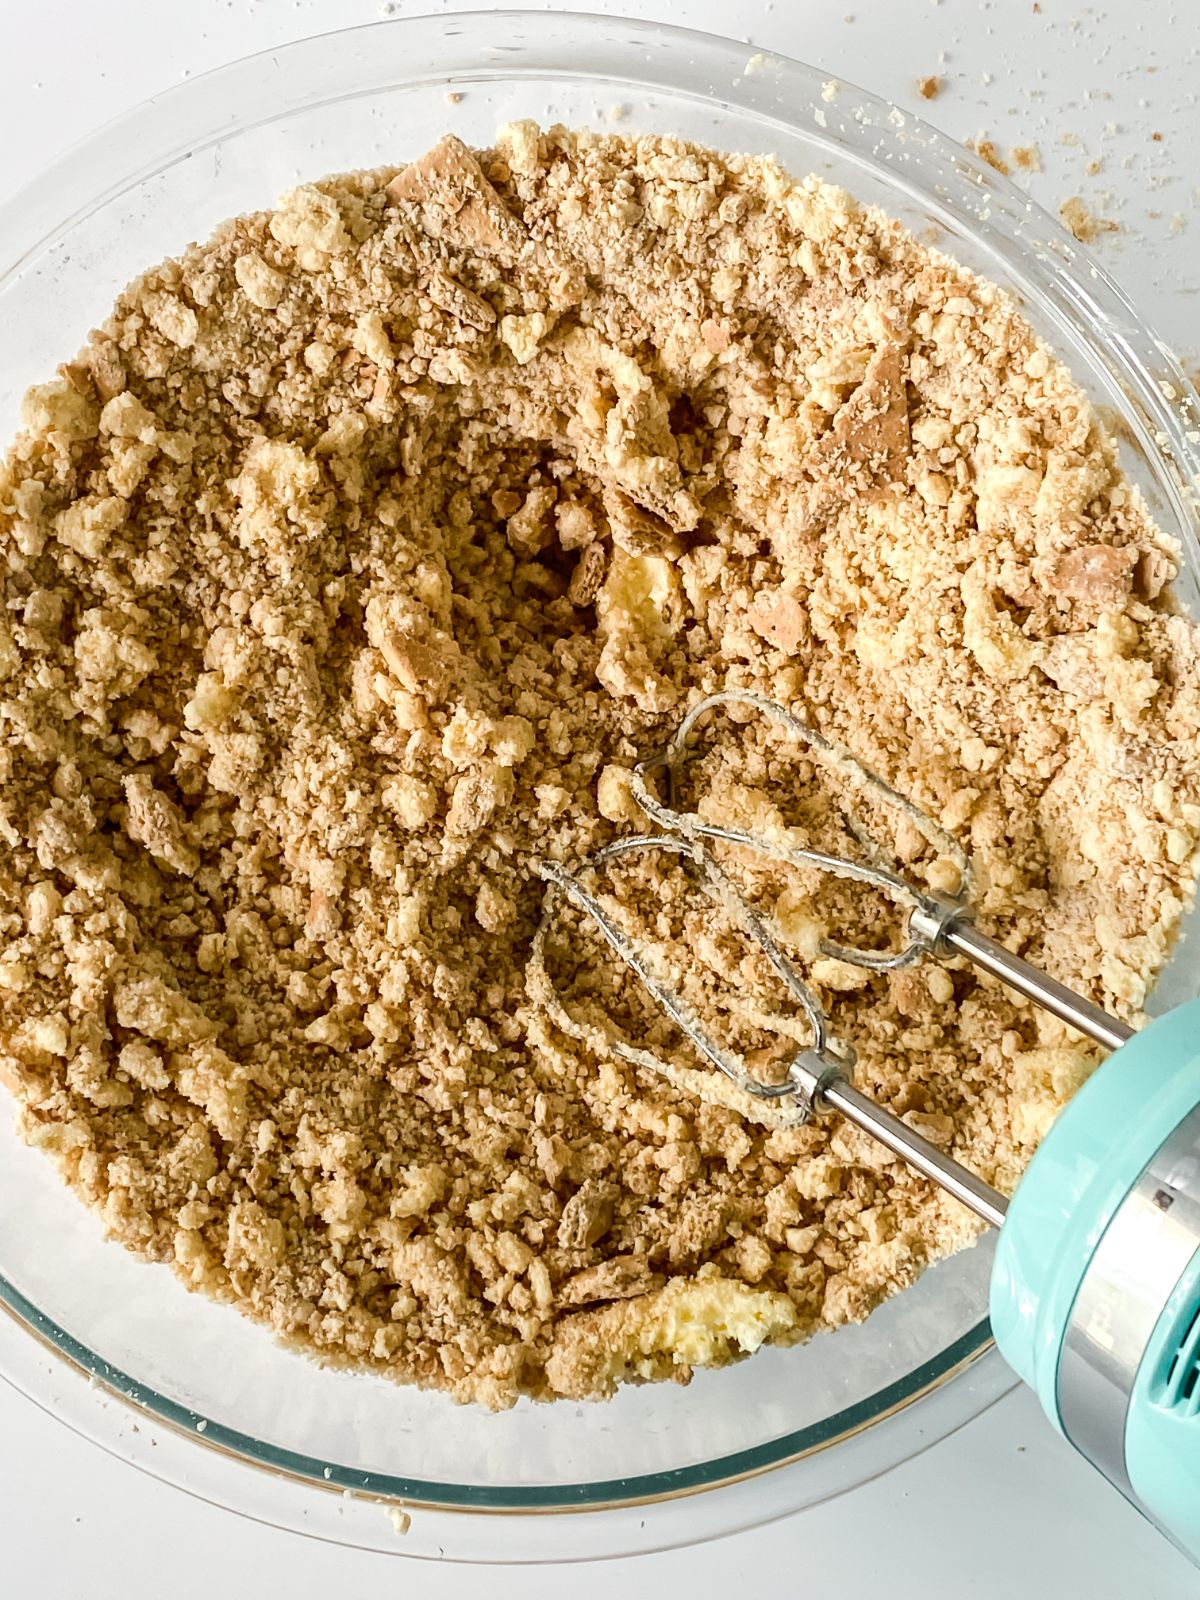 teal hand mixer in bowl with graham cracker crumbs and butter